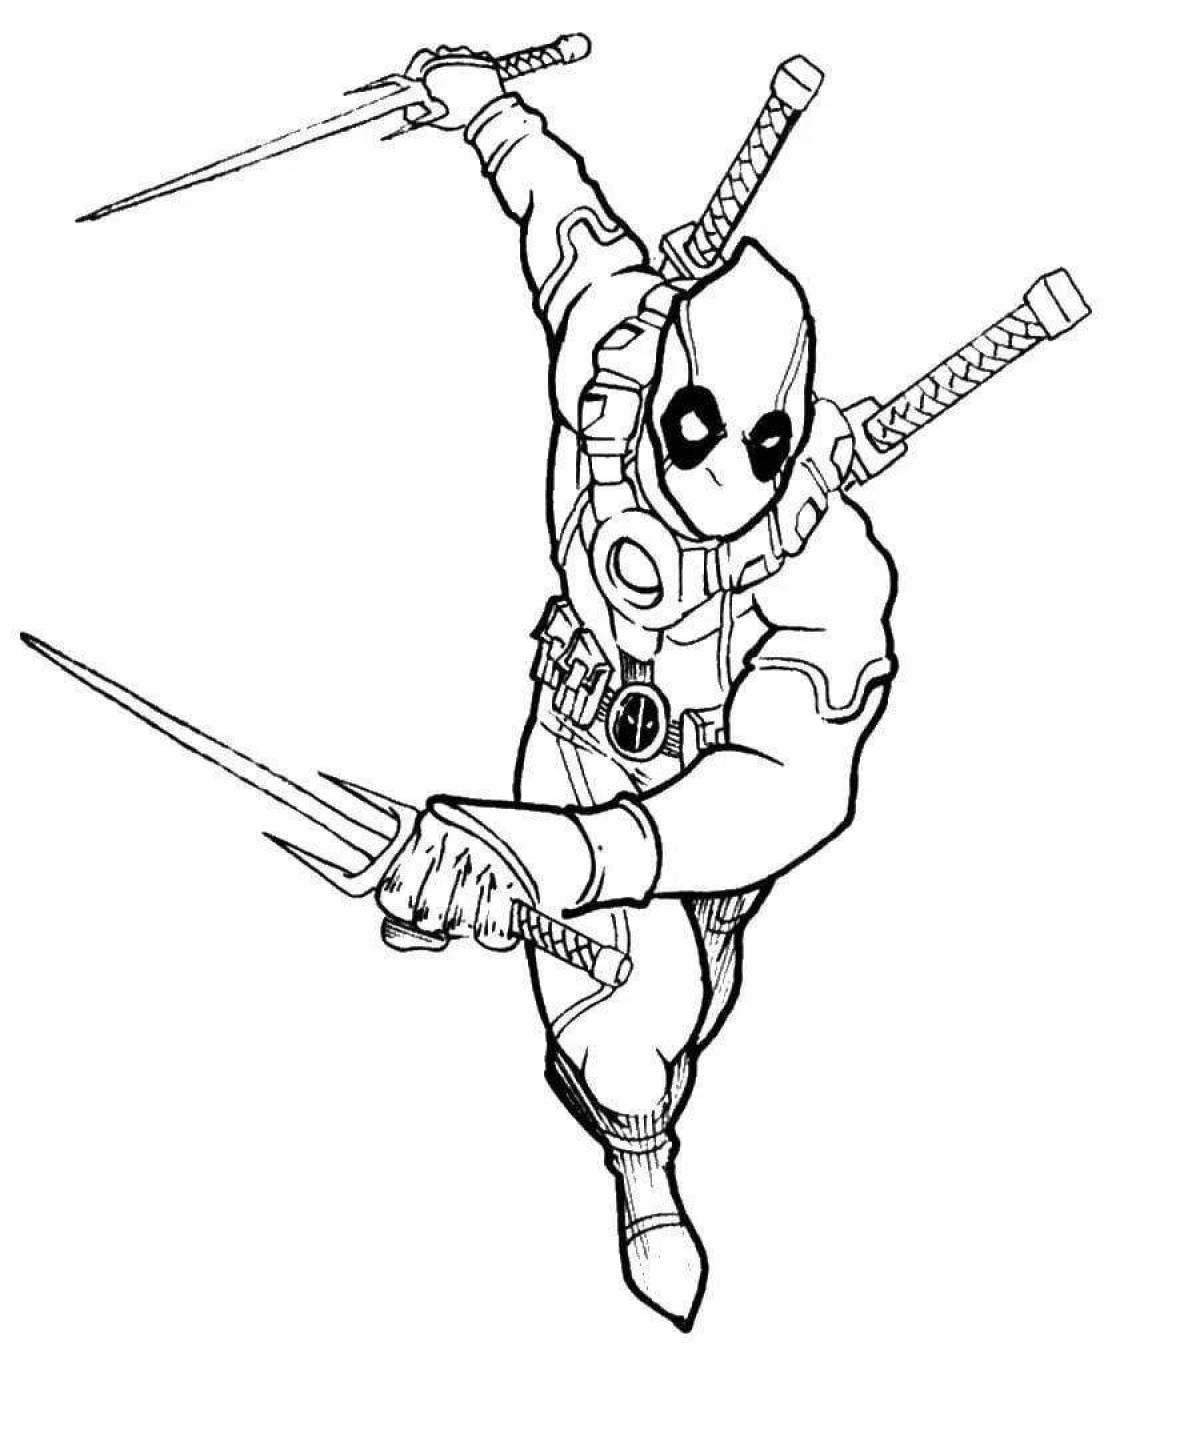 Exquisite deadpool coloring book for boys